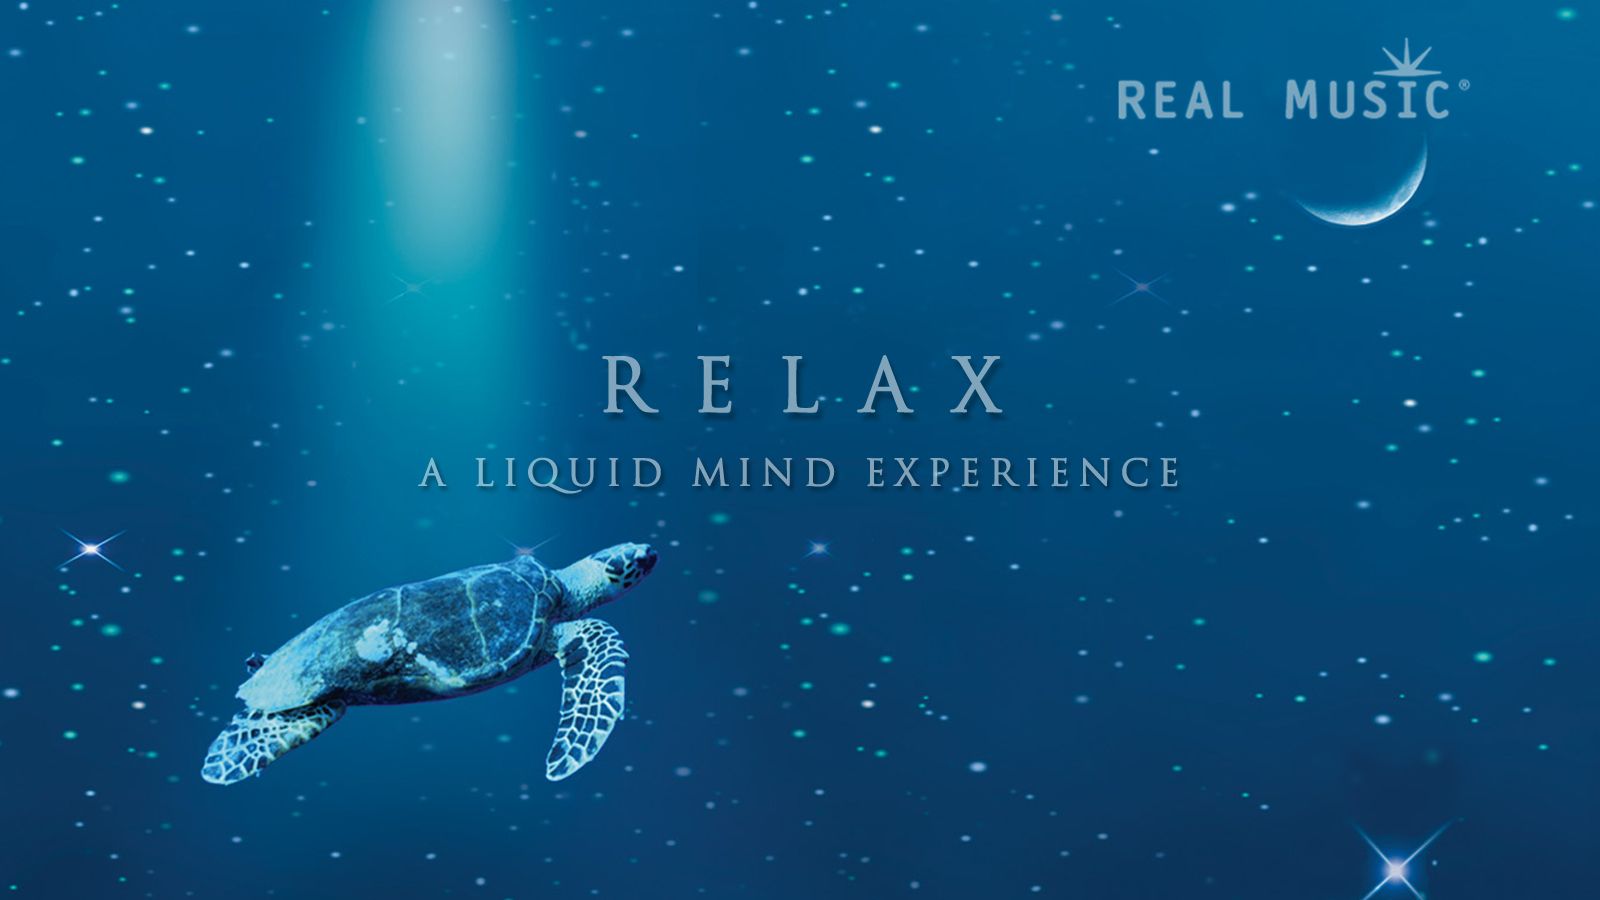 44+] Mind Relaxing Wallpapers